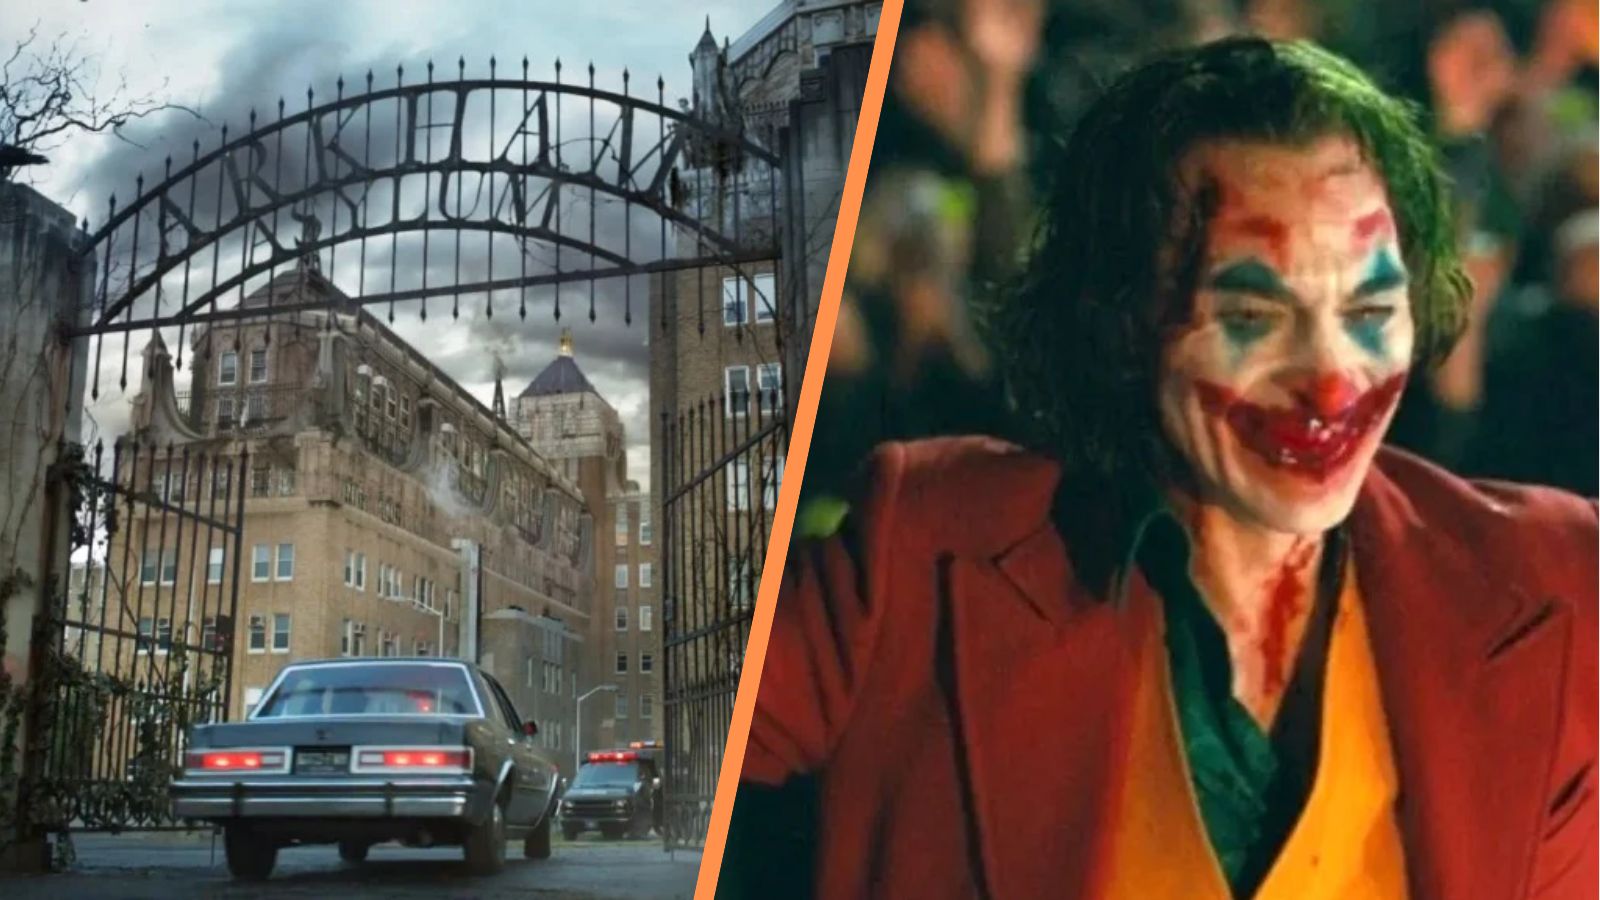 Much of ‘Joker 2’ will reportedly take place inside Arkham Asylum